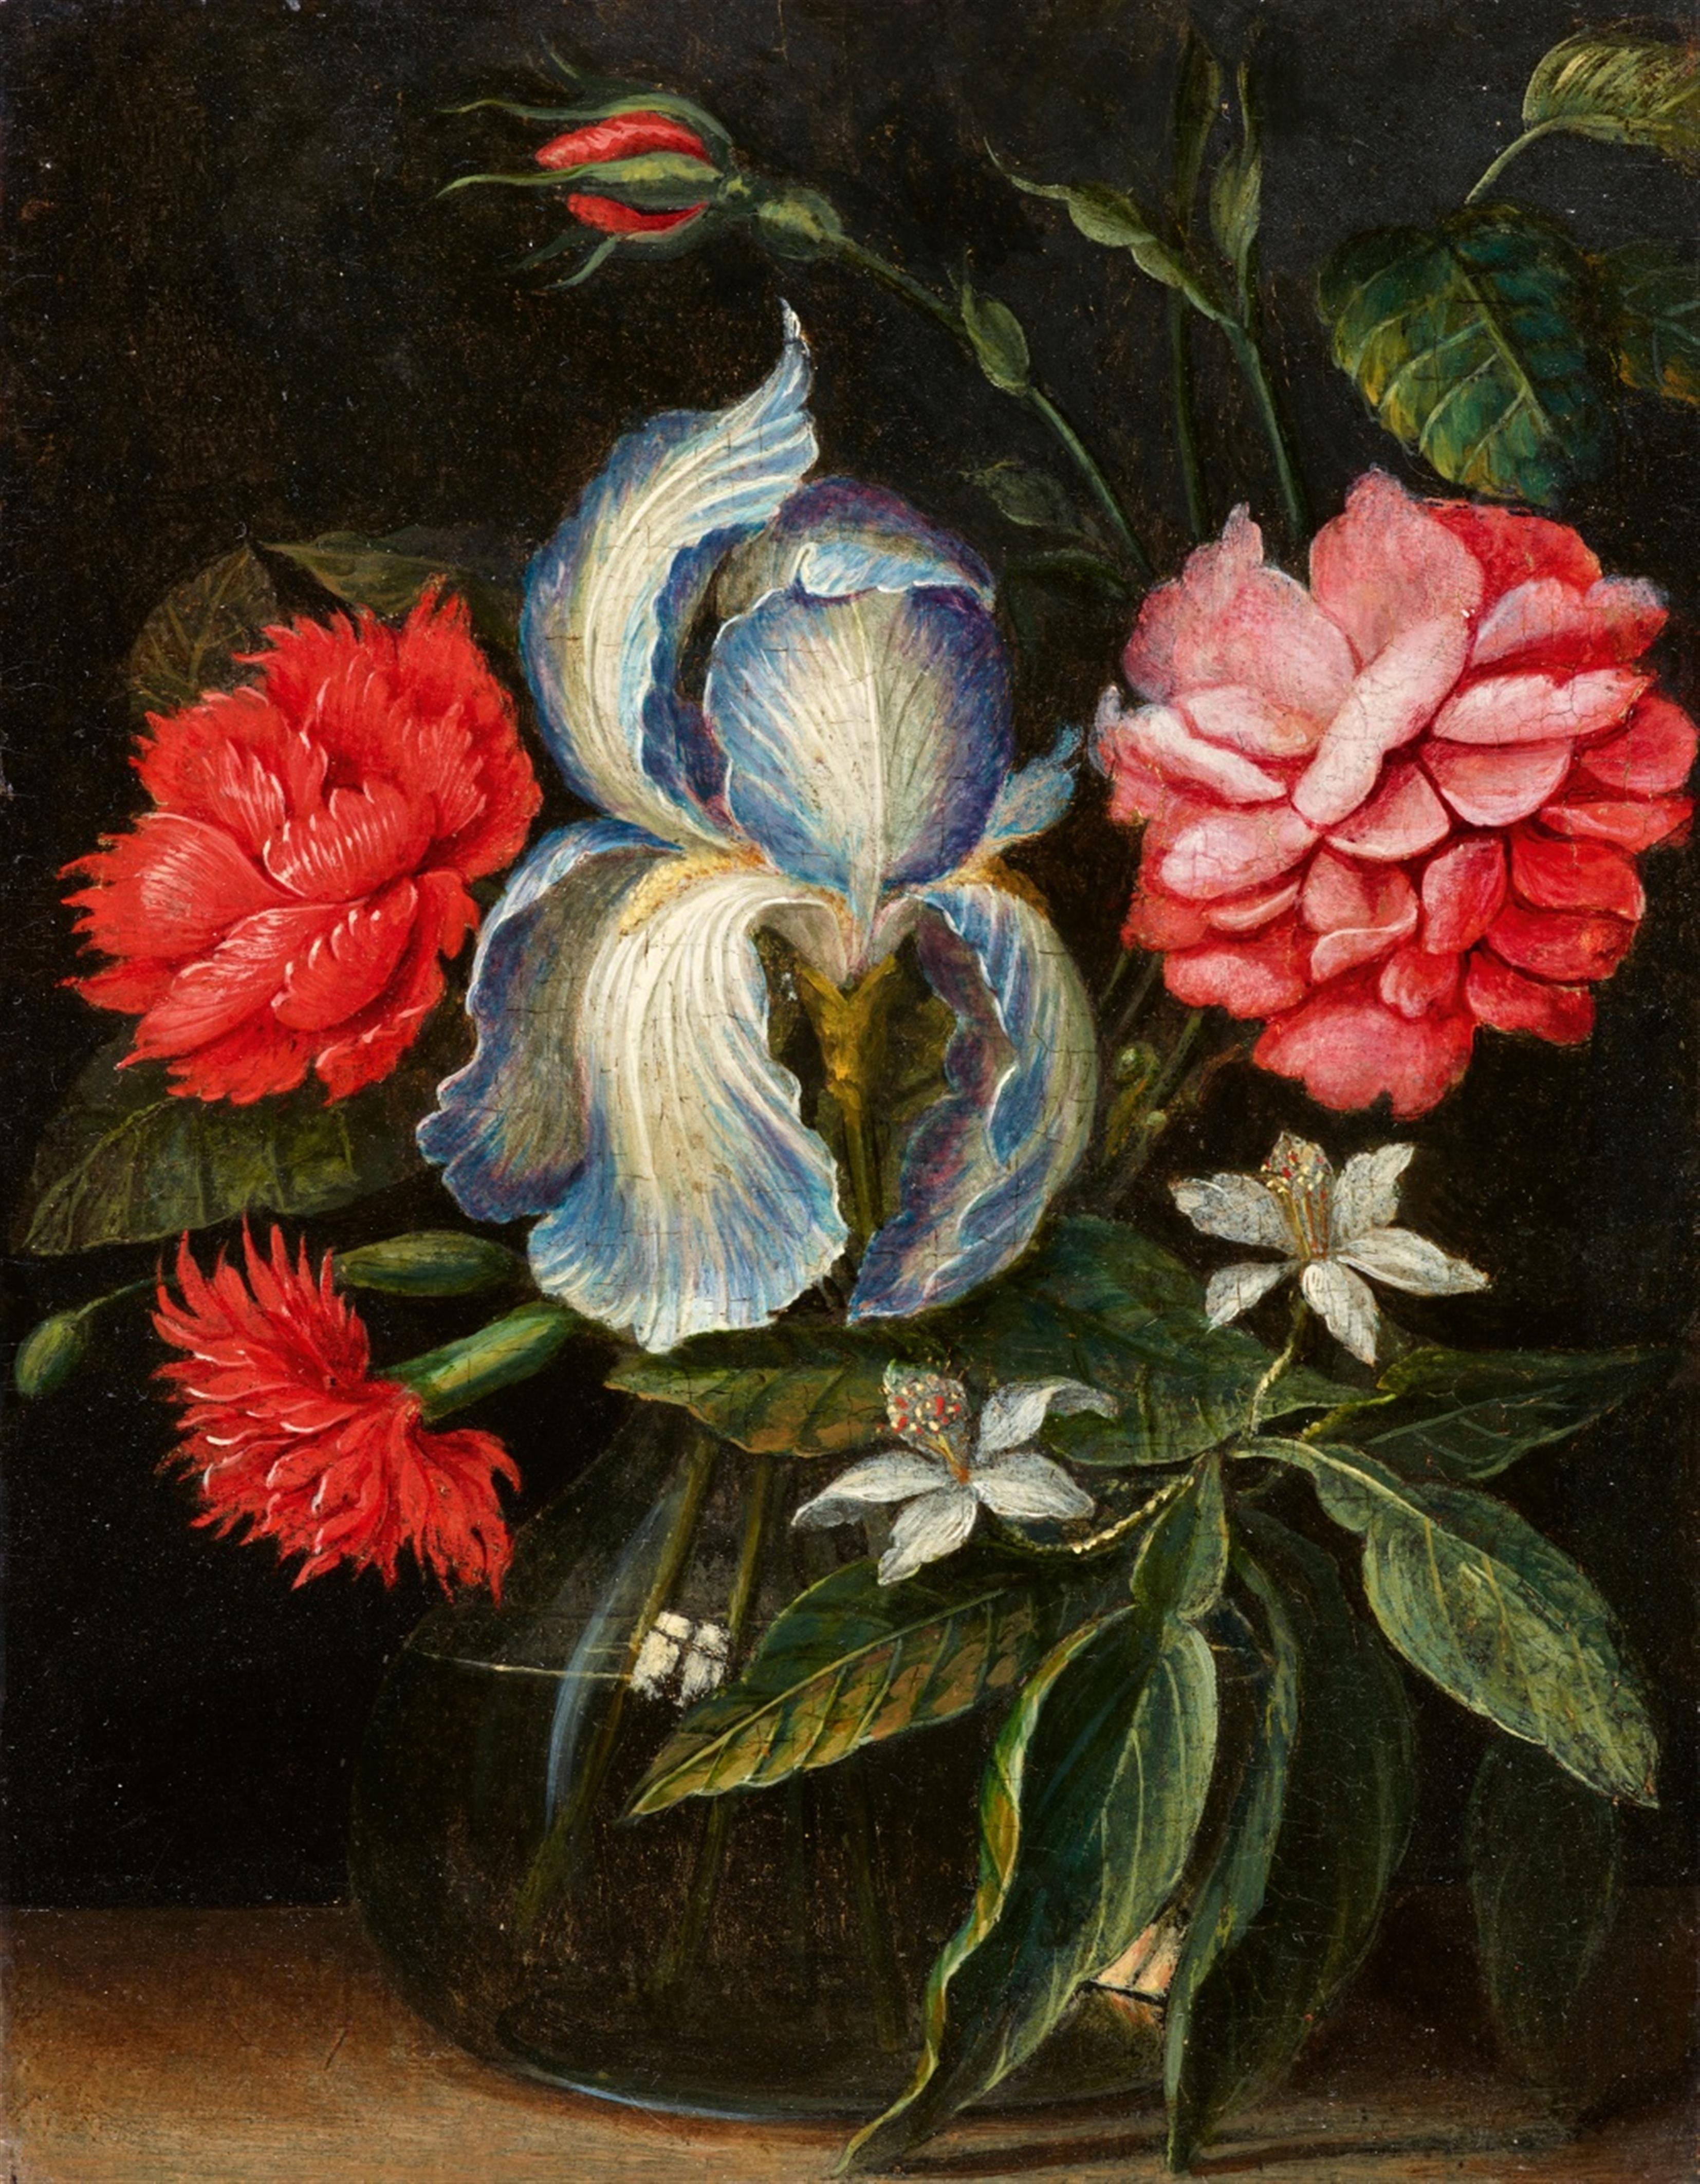 Flemish School 17th century - Iris, Rose, Carnations and a Citrus Branch in a Glass Vase - image-1